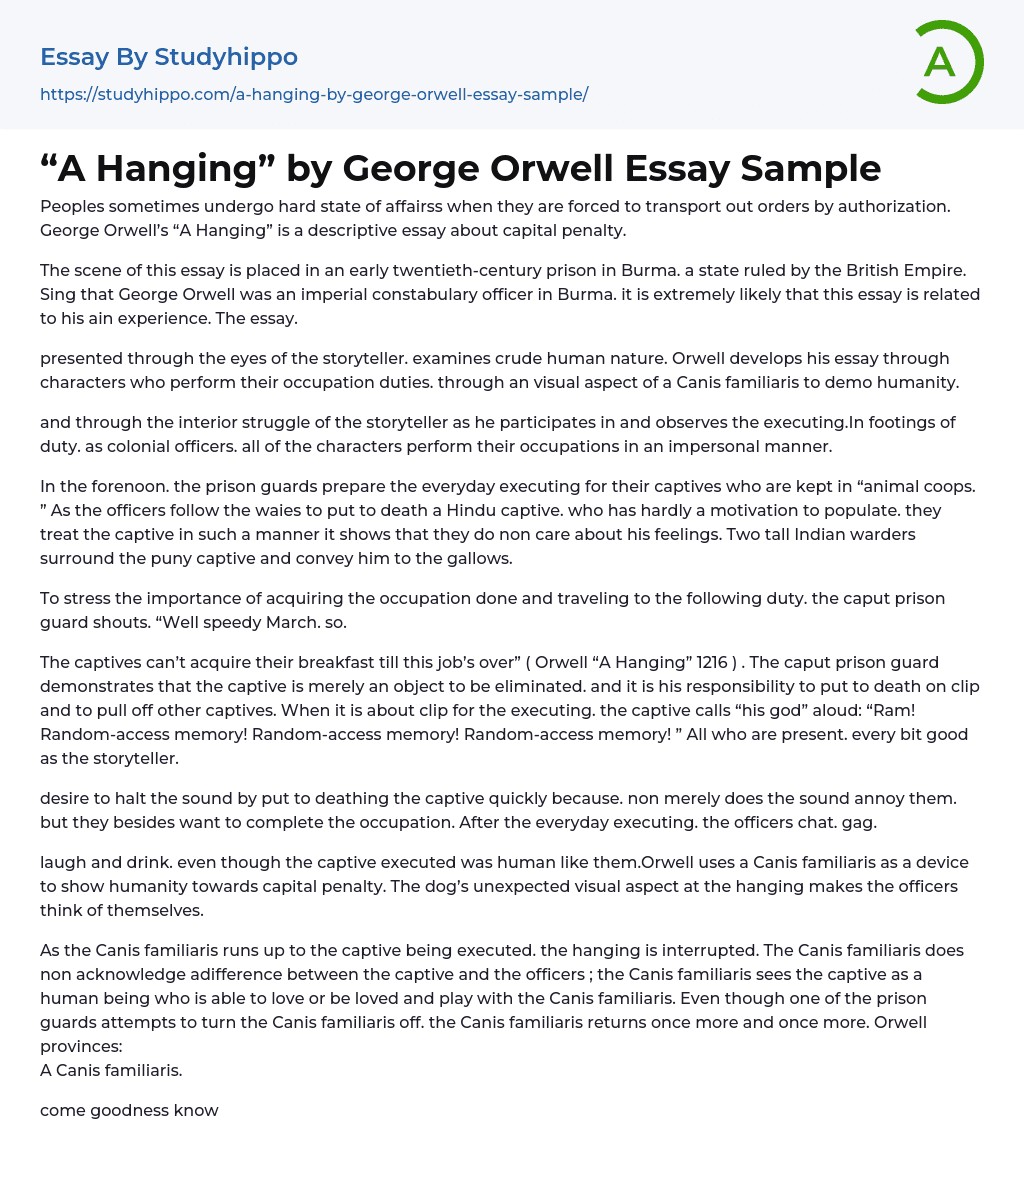 “A Hanging” by George Orwell Essay Sample